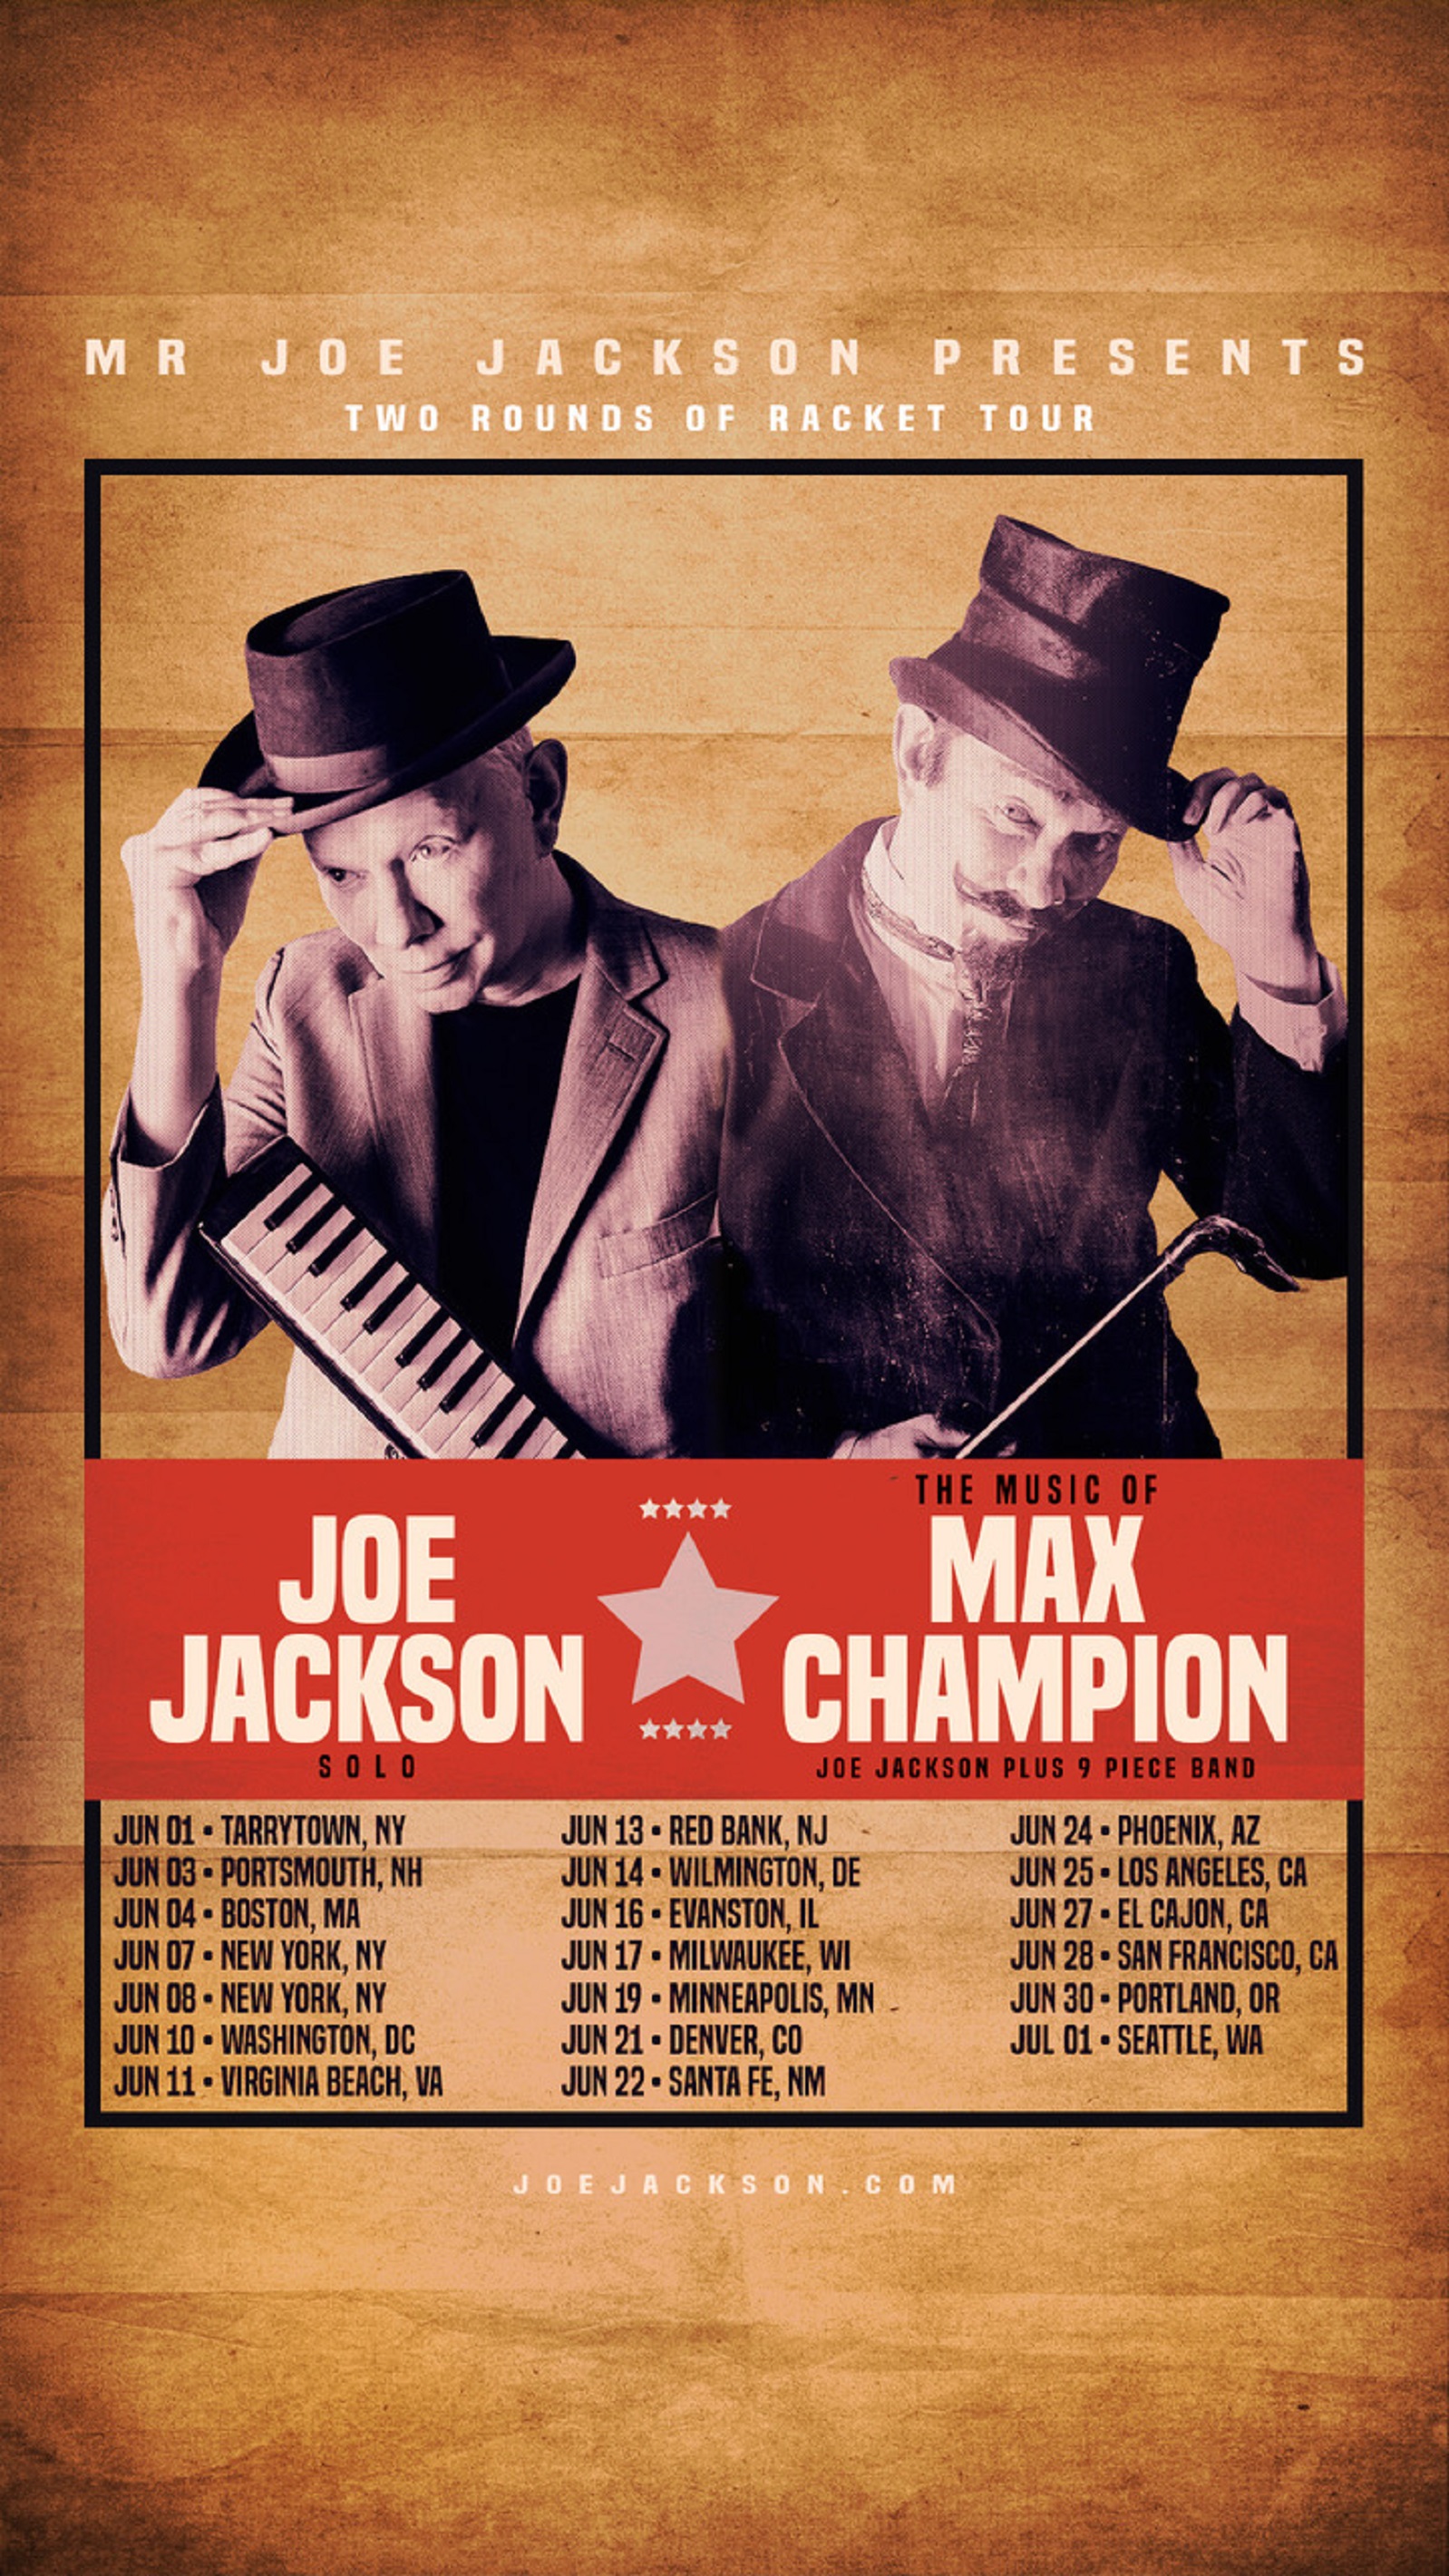 Mr. Joe Jackson Presents "The Two Rounds Of Racket Tour" Appearing in 19 North American Cities in Summer 2024